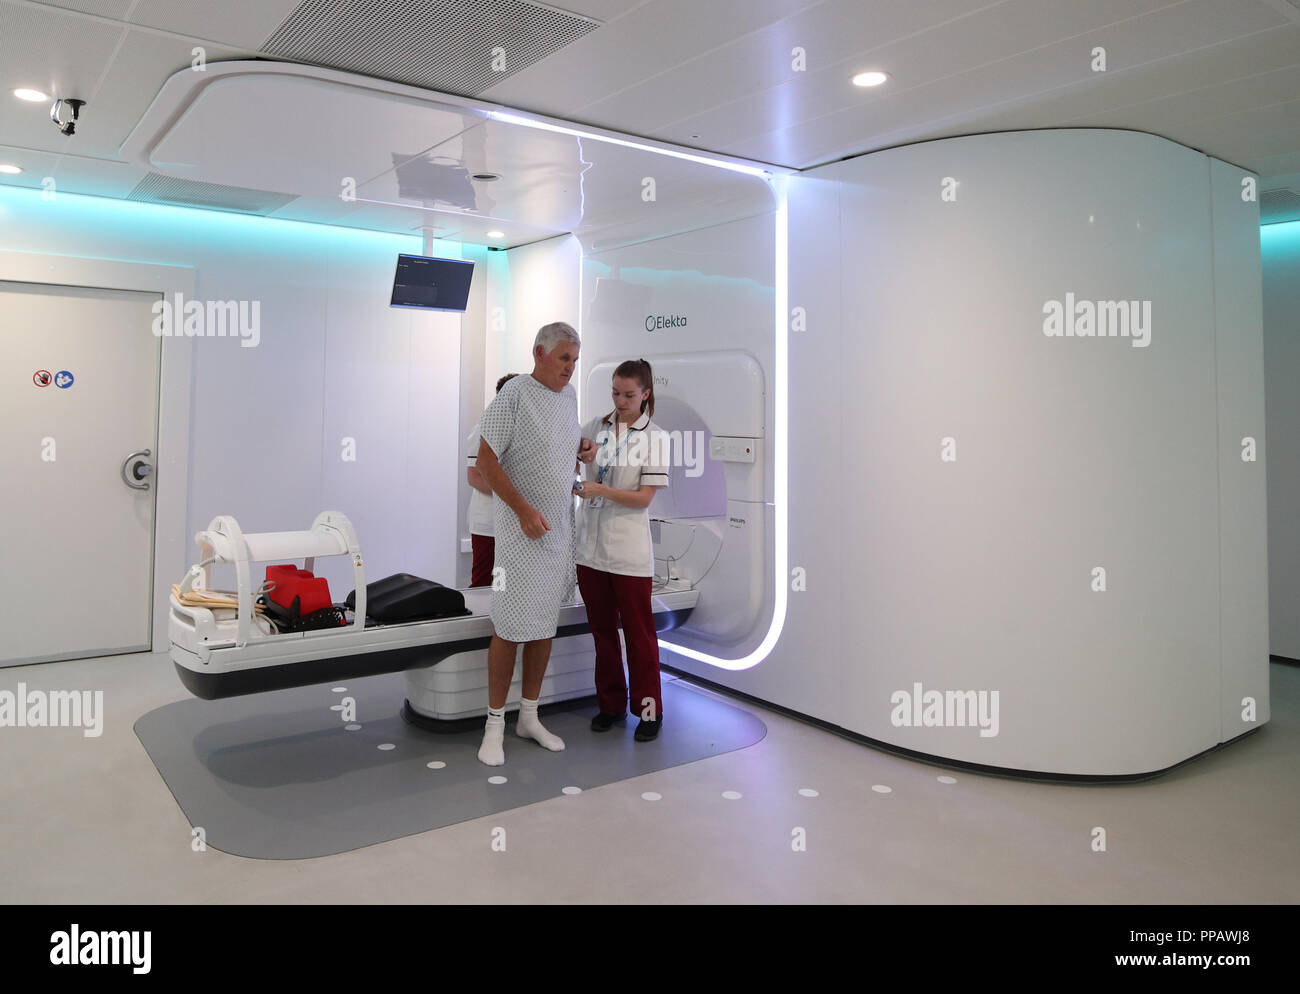 Embargoed to 1700 Monday September 24 Radiographer Gillian Smith helps patient Barry Dolling, aged 65, from Selsdon, Surrey, after treatment using a Magnetic Resonance Linear Accelerator (MR Linac) machine, at the Royal Marsden Hospital in Sutton Surrey. Dolling was diagnosed with prostate cancer in April 2018, and became the first patient in the UK to receive a pioneering new form of radiotherapy. Stock Photo